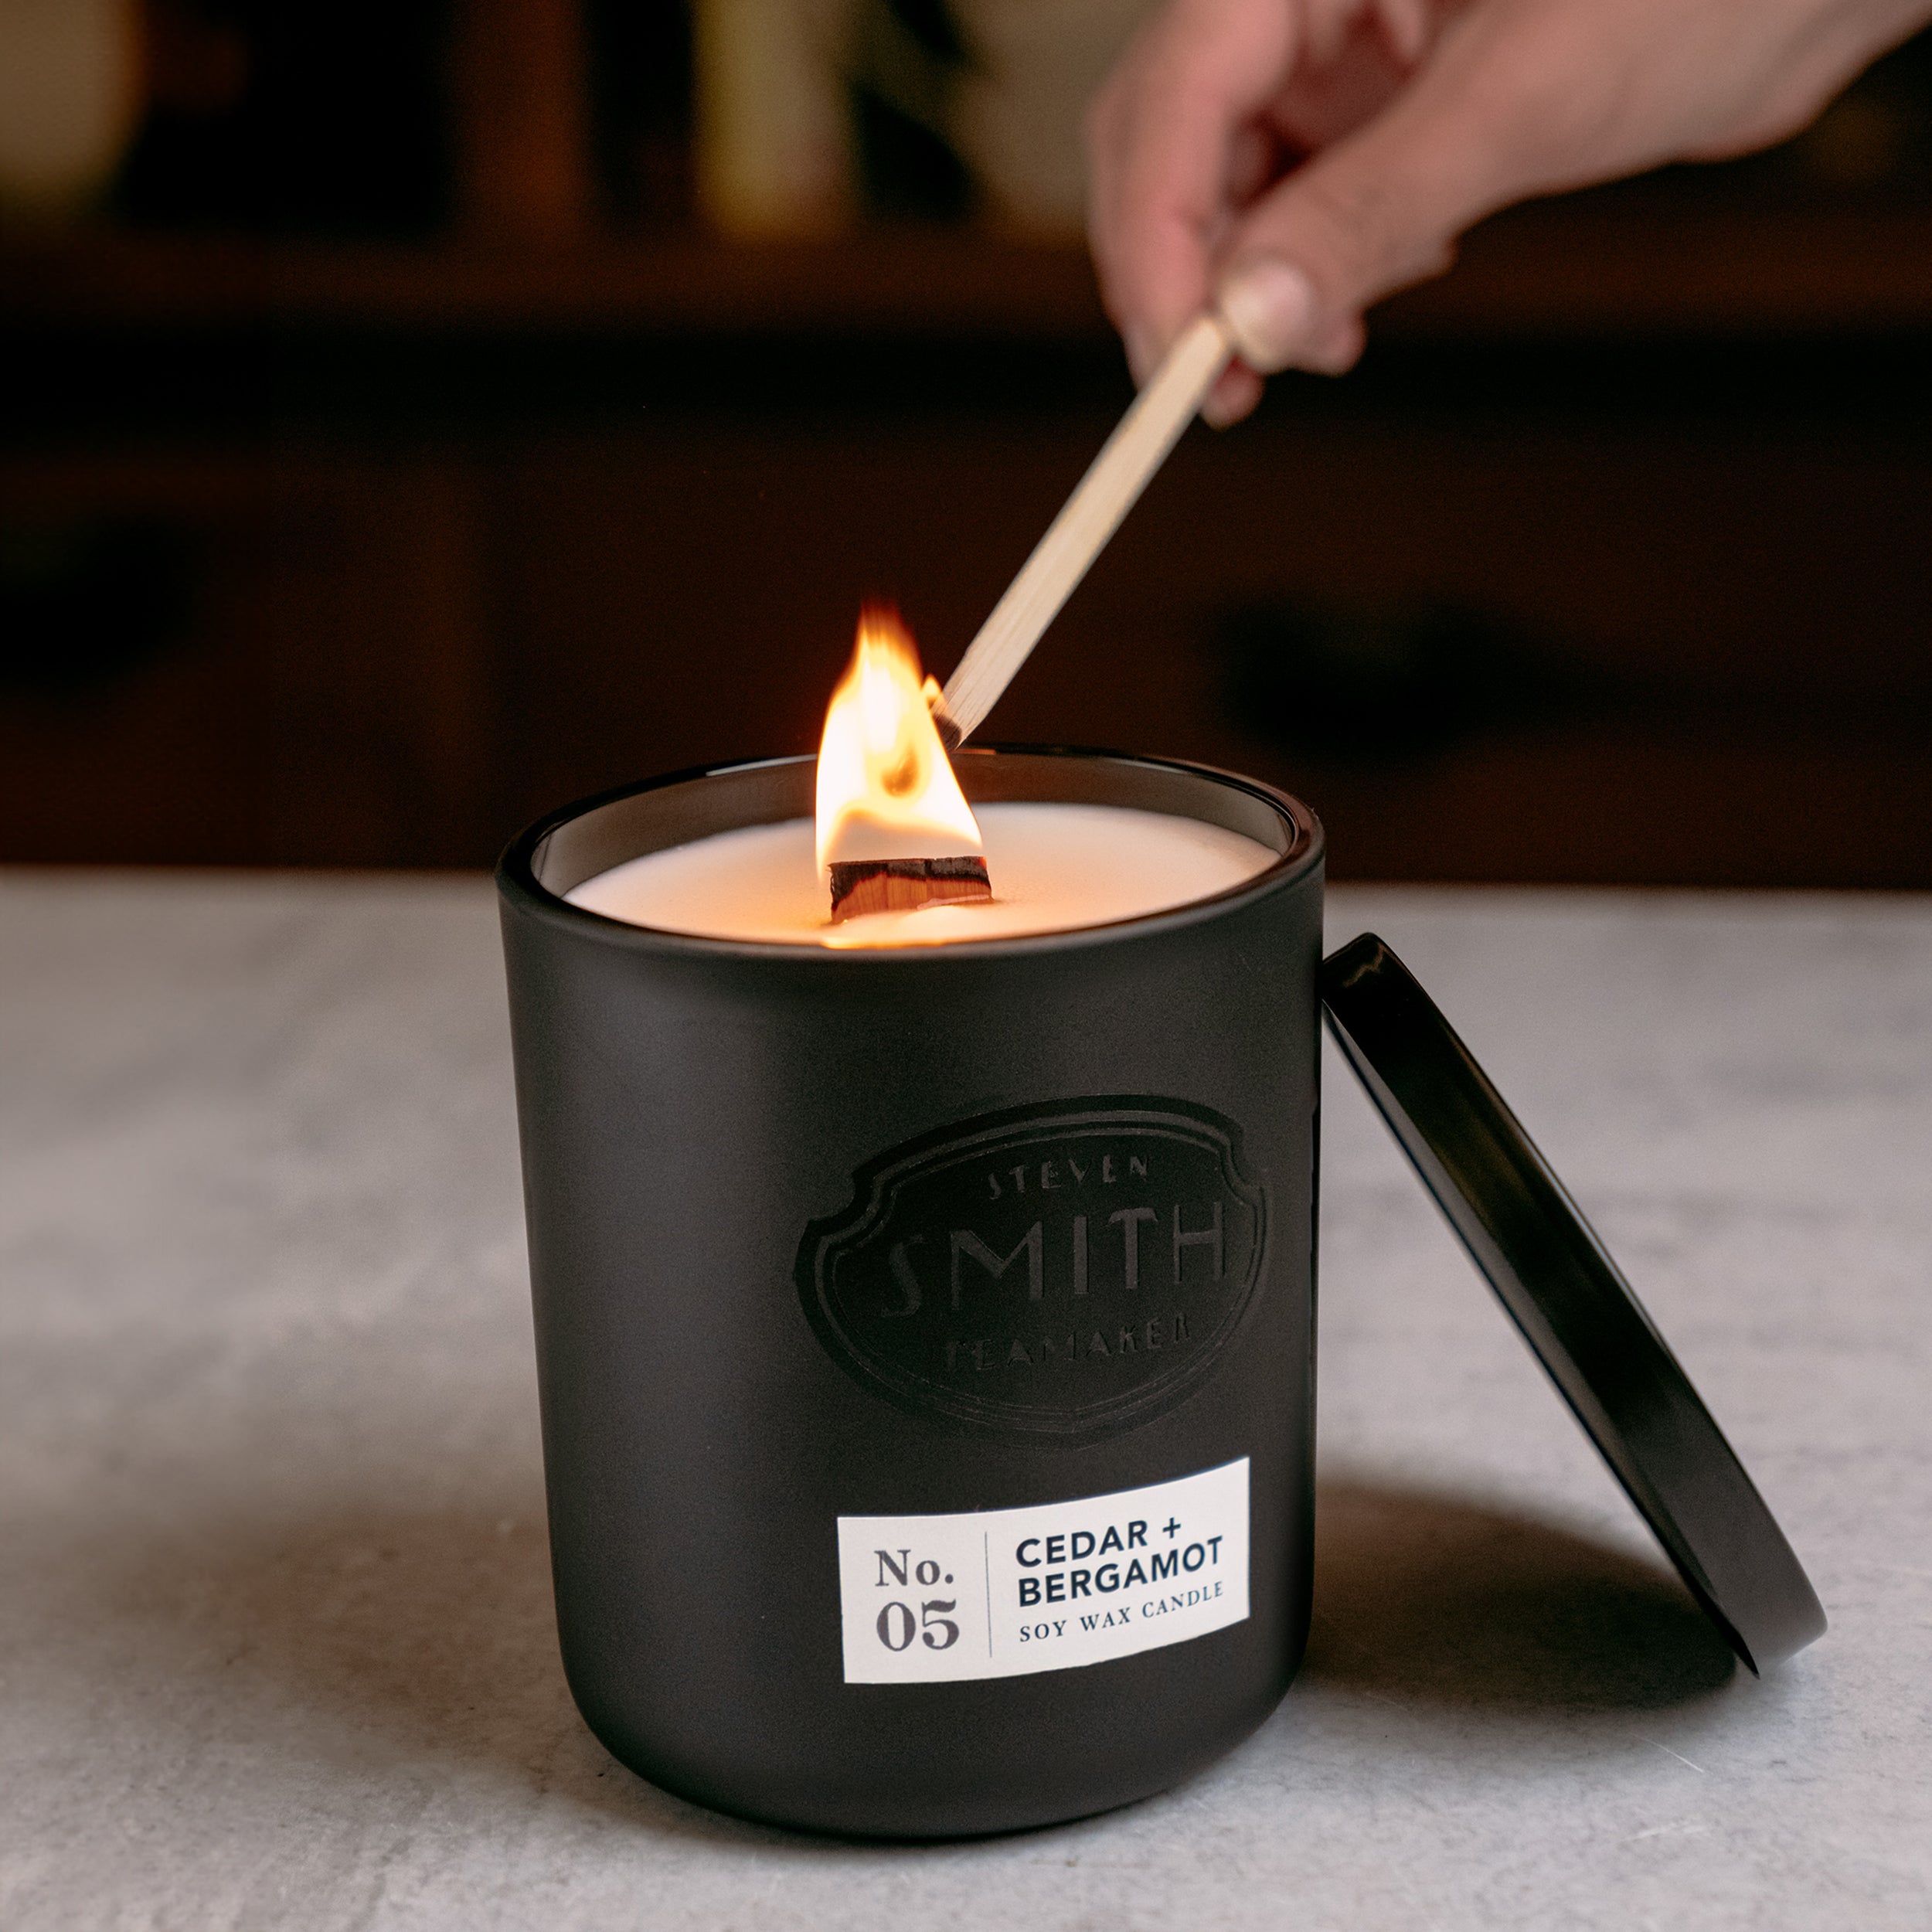 Cedar and bergamot candle with wooden wick being lit by a long wooden match.